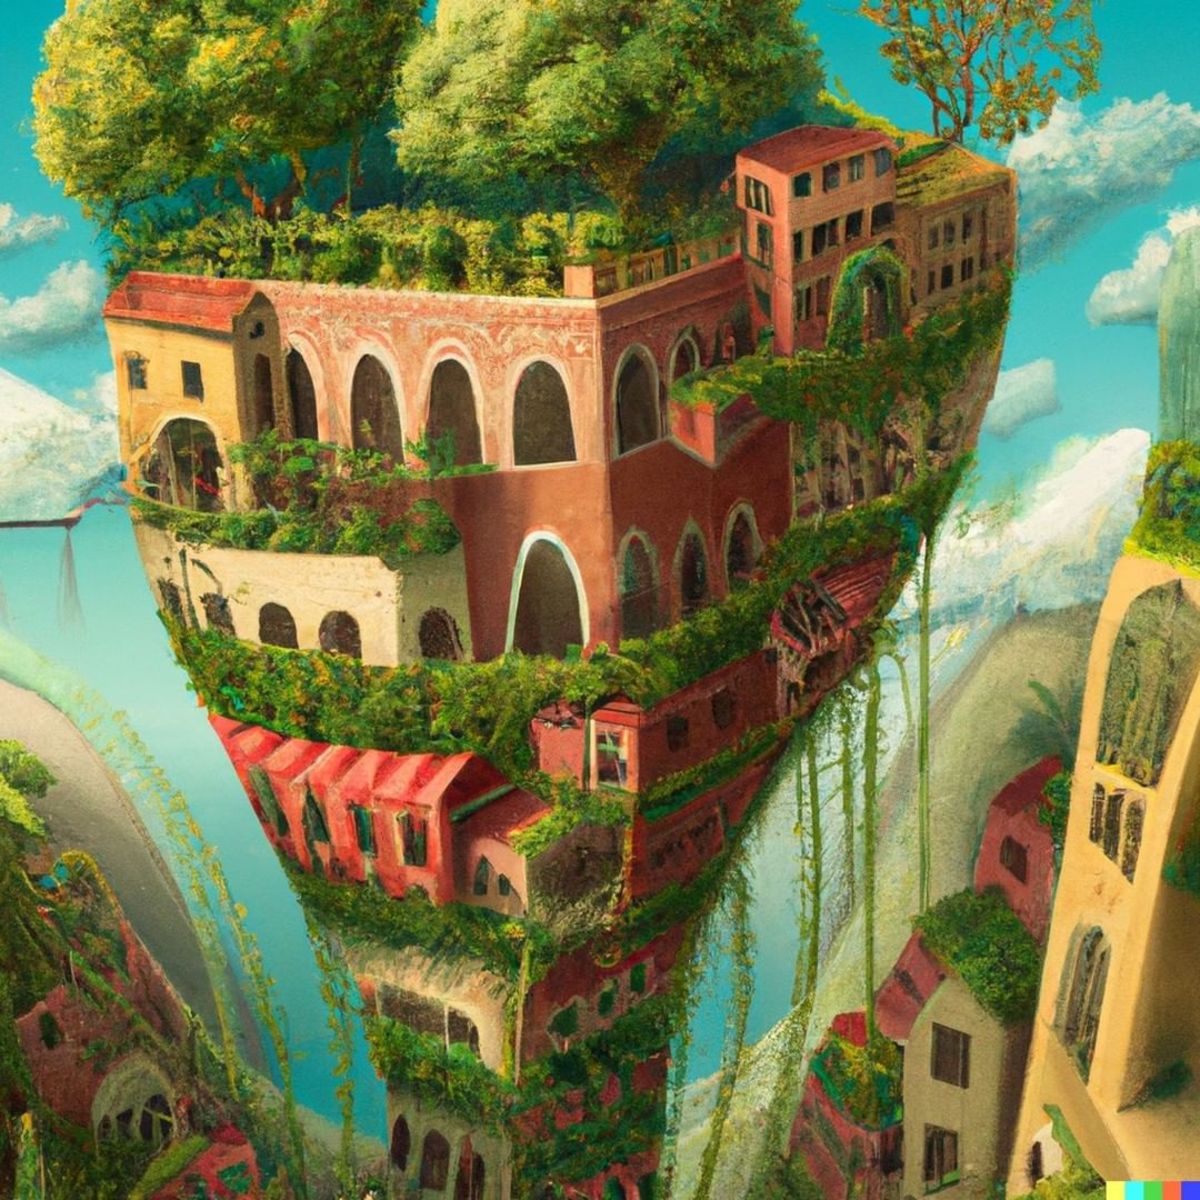 The Hanging Gardens of Babylon in the middle of a city, in the style of Dalí (Actual text prompt used)